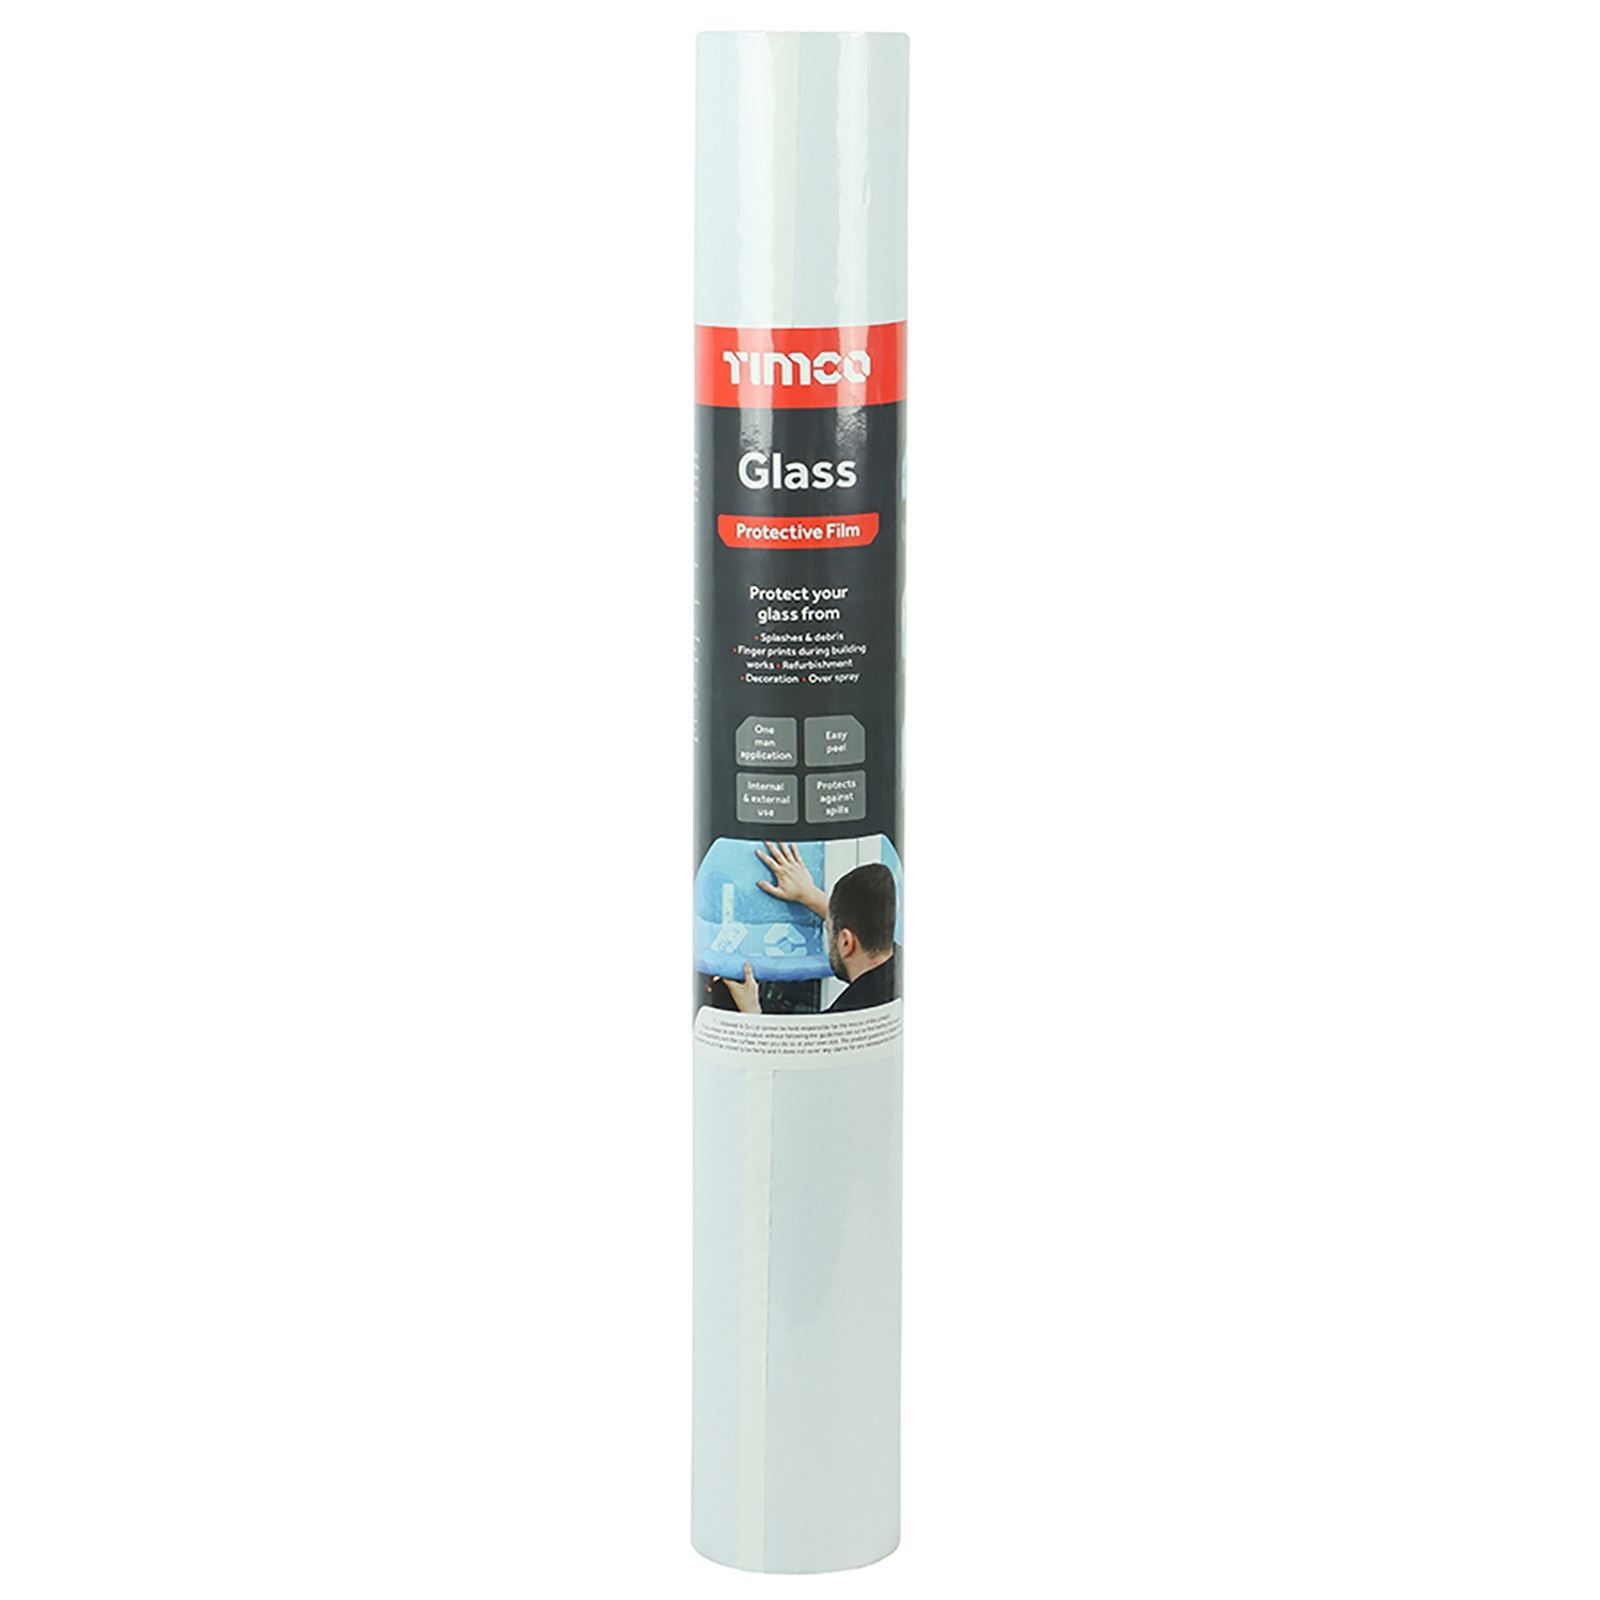 TIMCO Glass Protective Film 50m x 600mm Roll